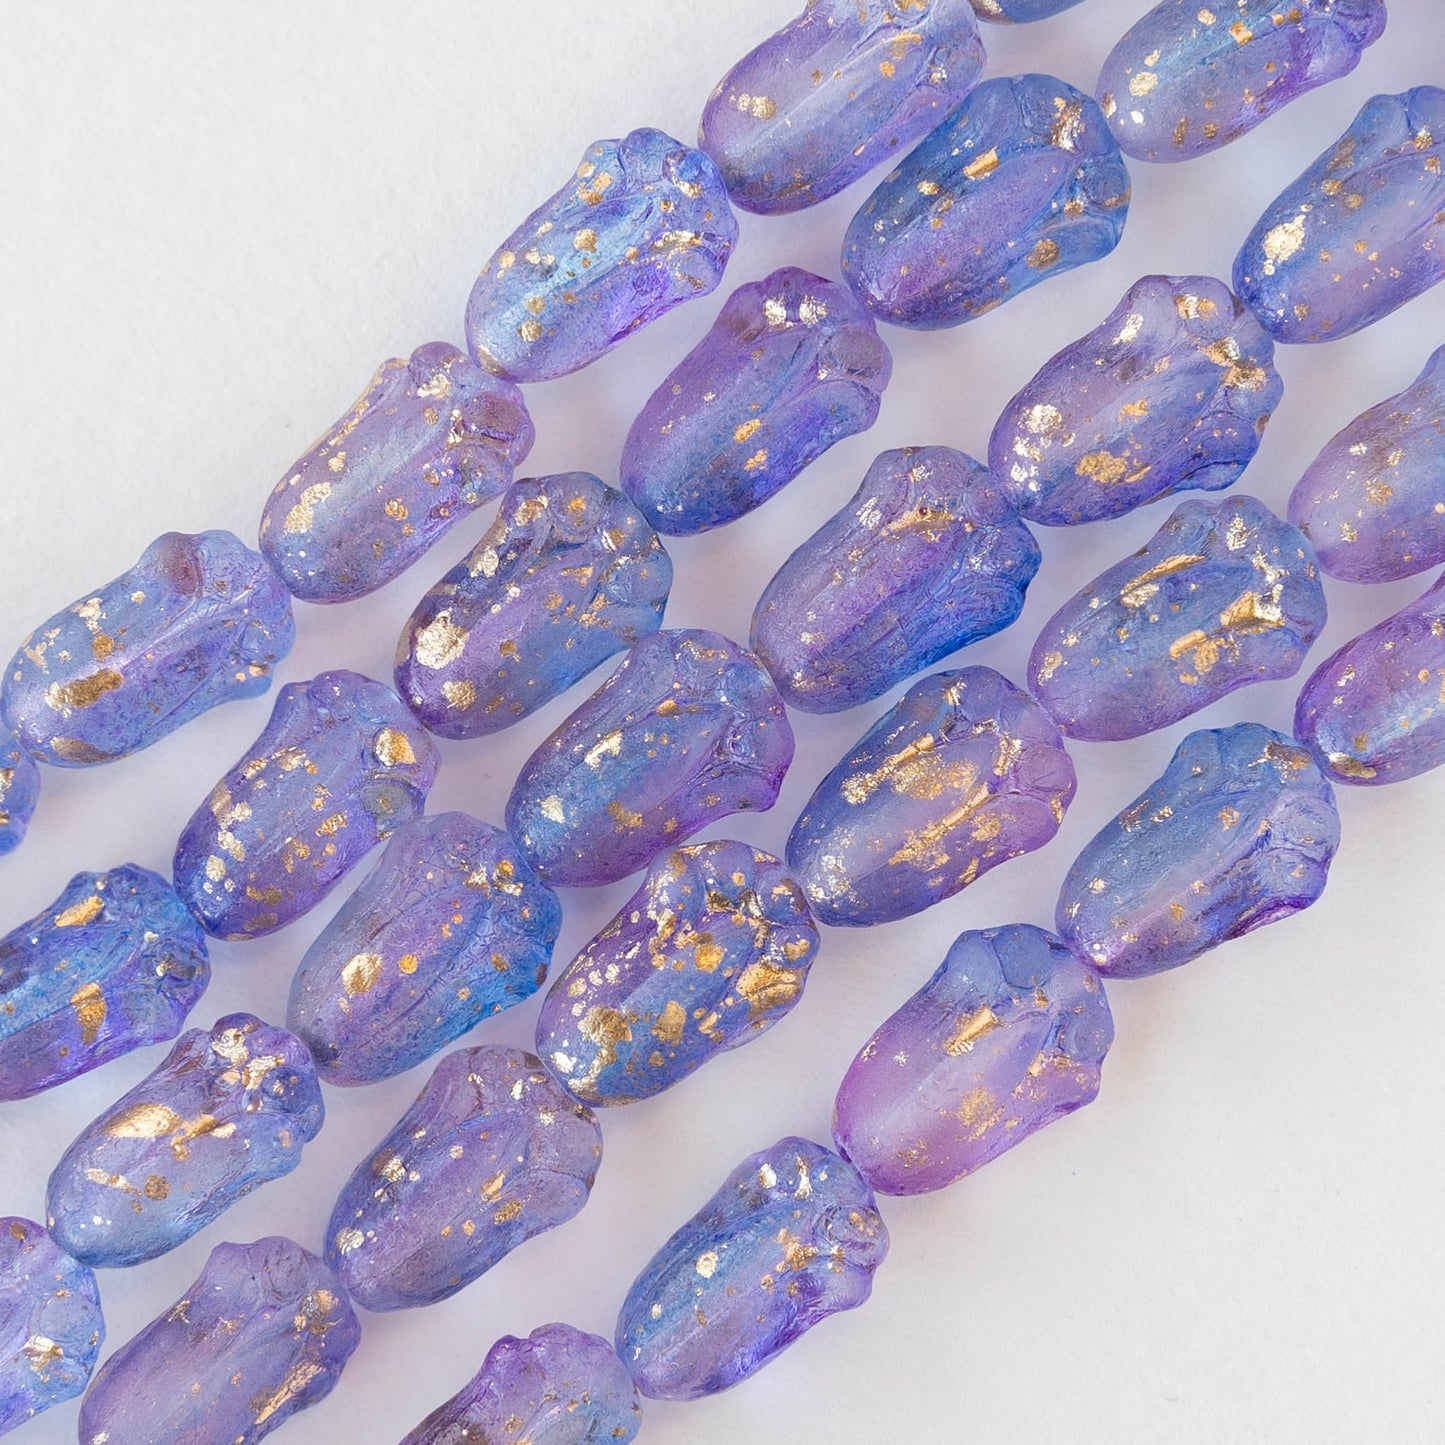 Tulip Flower Beads - Lavender with Gold Dust - 12 beads